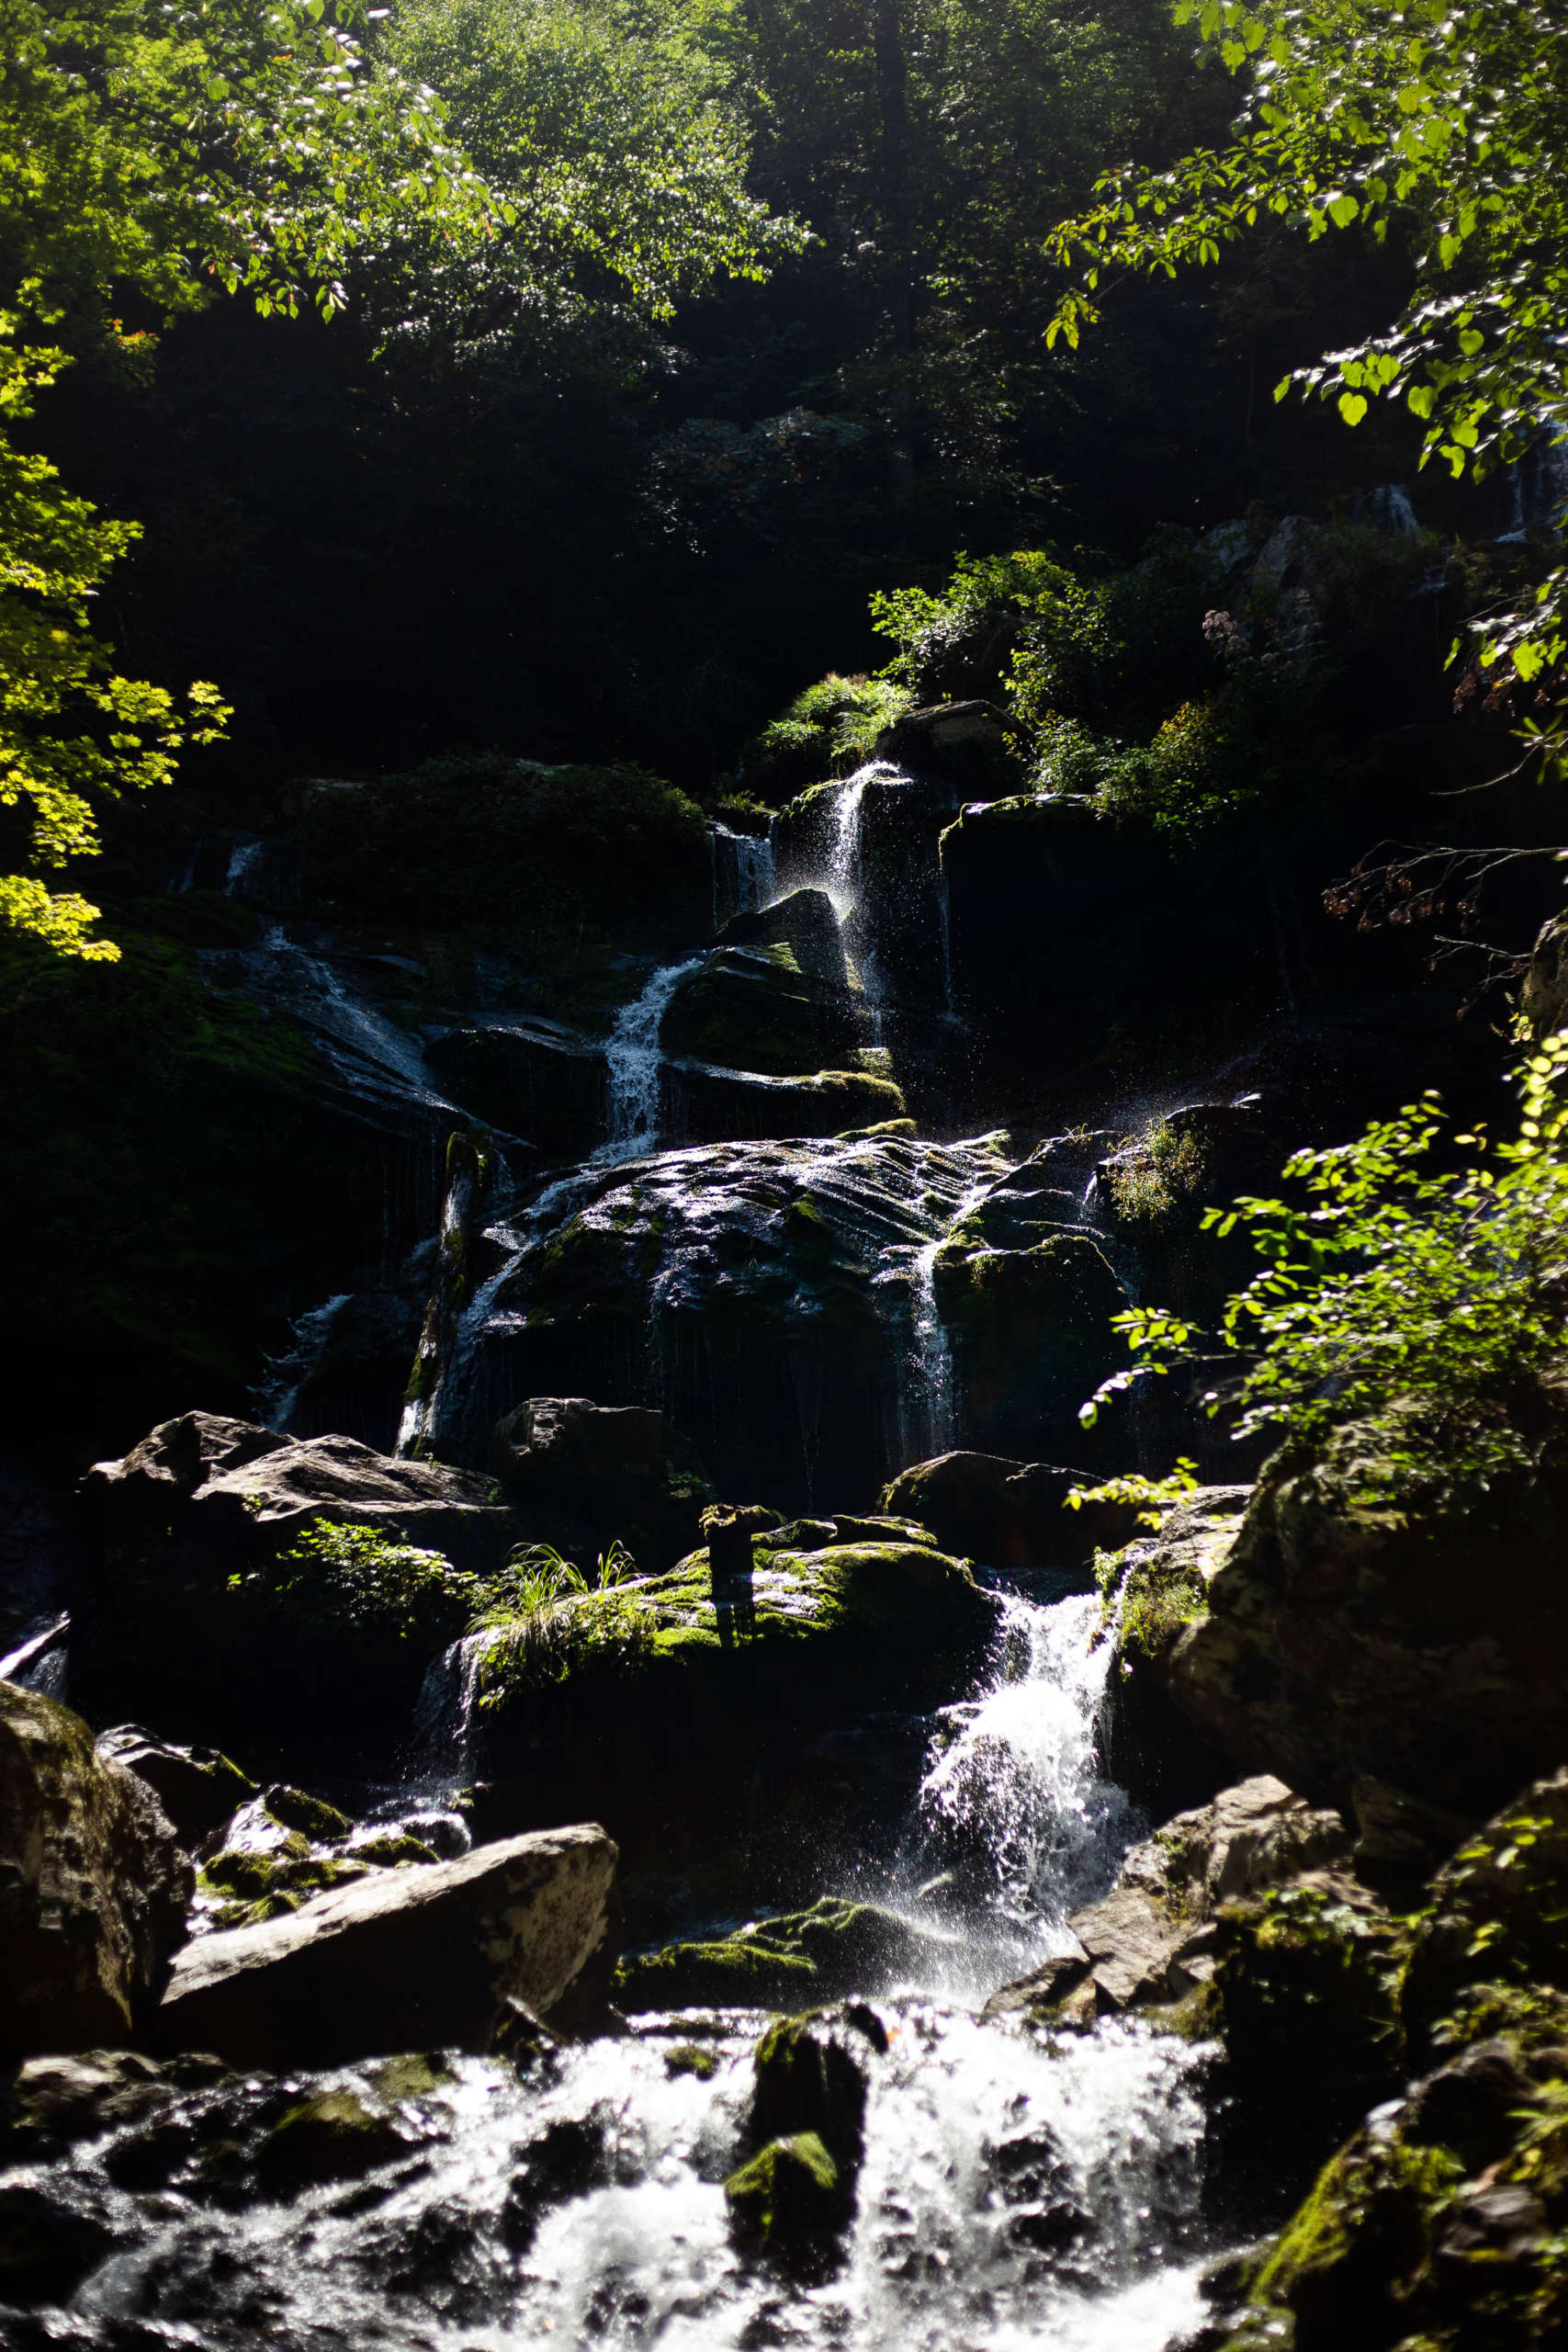 A waterfall in a wooded area splits into several streams as it pours over mossy rocks under bright sunlight. The photo is broken up into areas of bright light and sharp shadow.